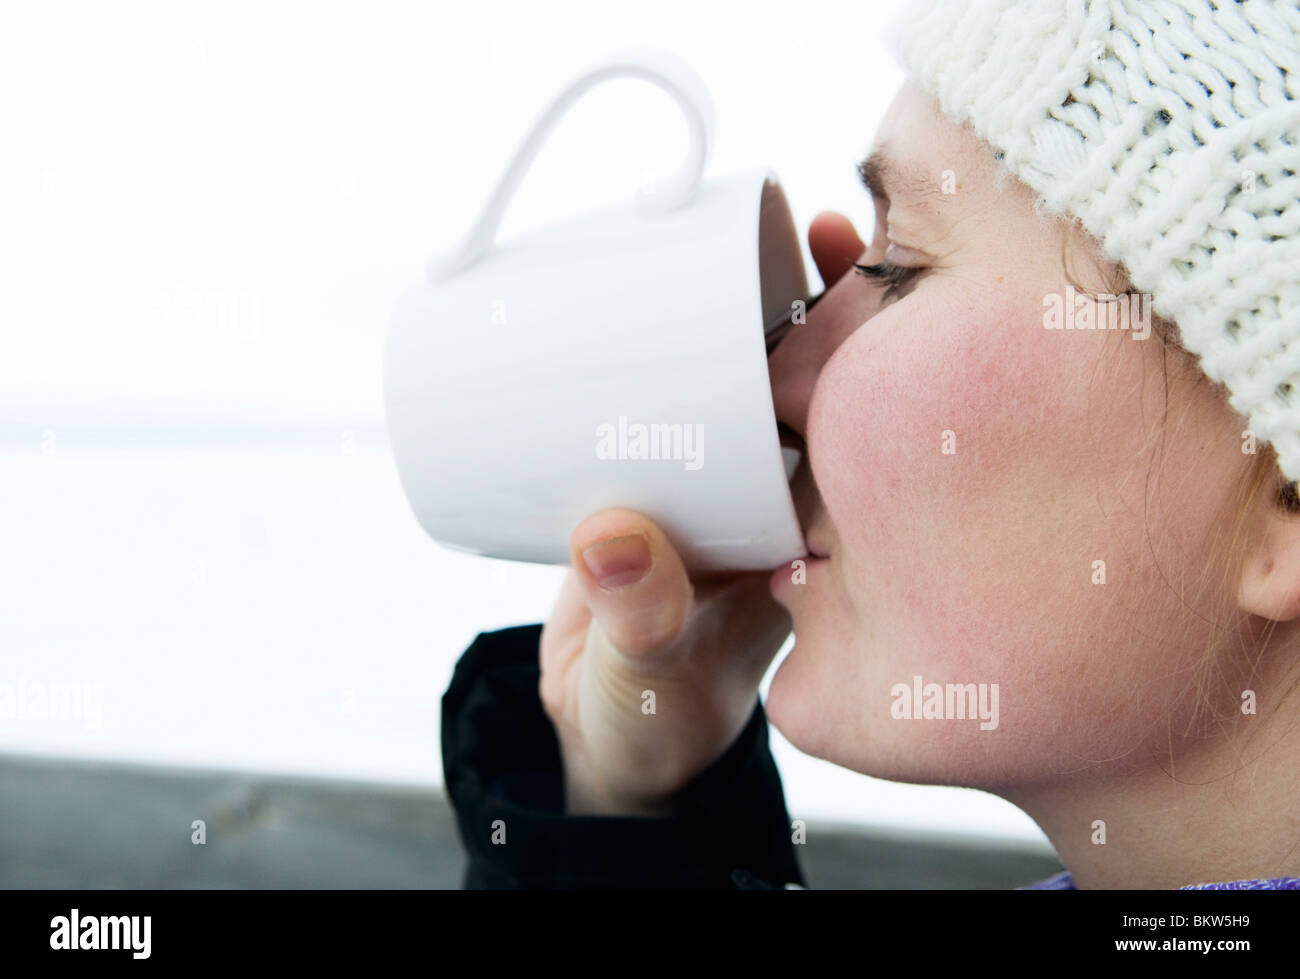 Woman with cup of hot beverages Stock Photo